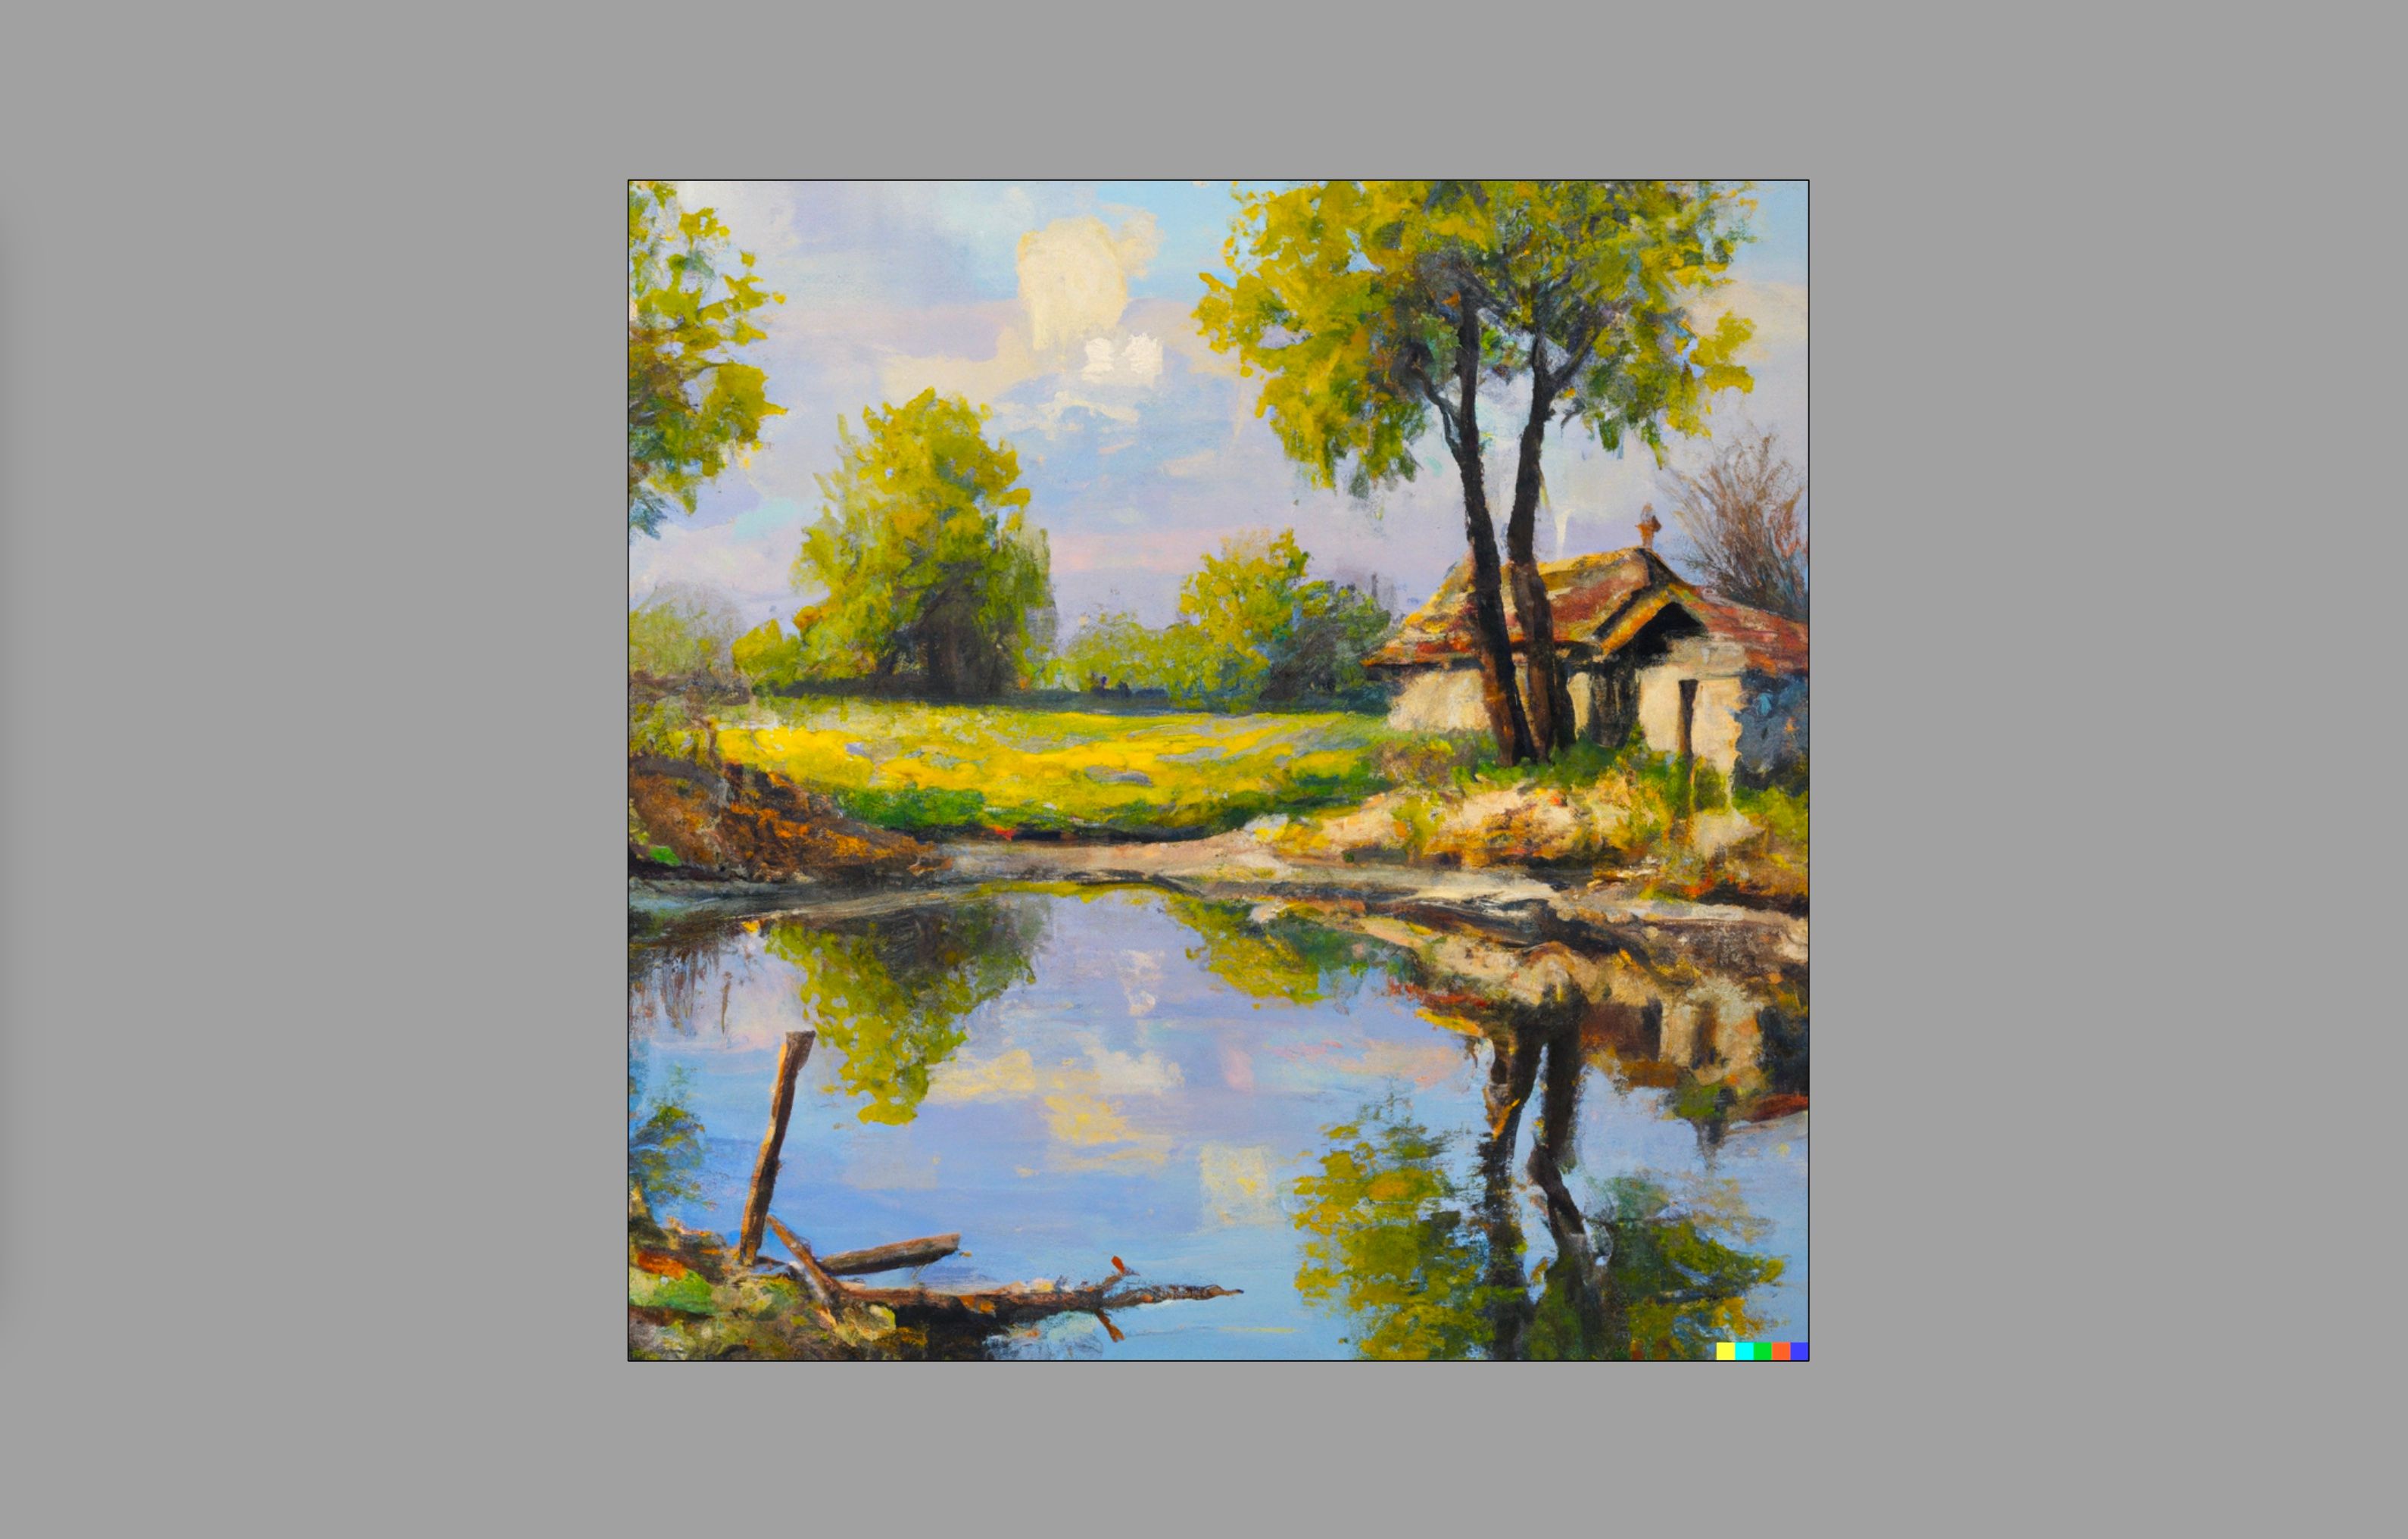 An oil painting of a cottage by a pond, generated with Dall-E